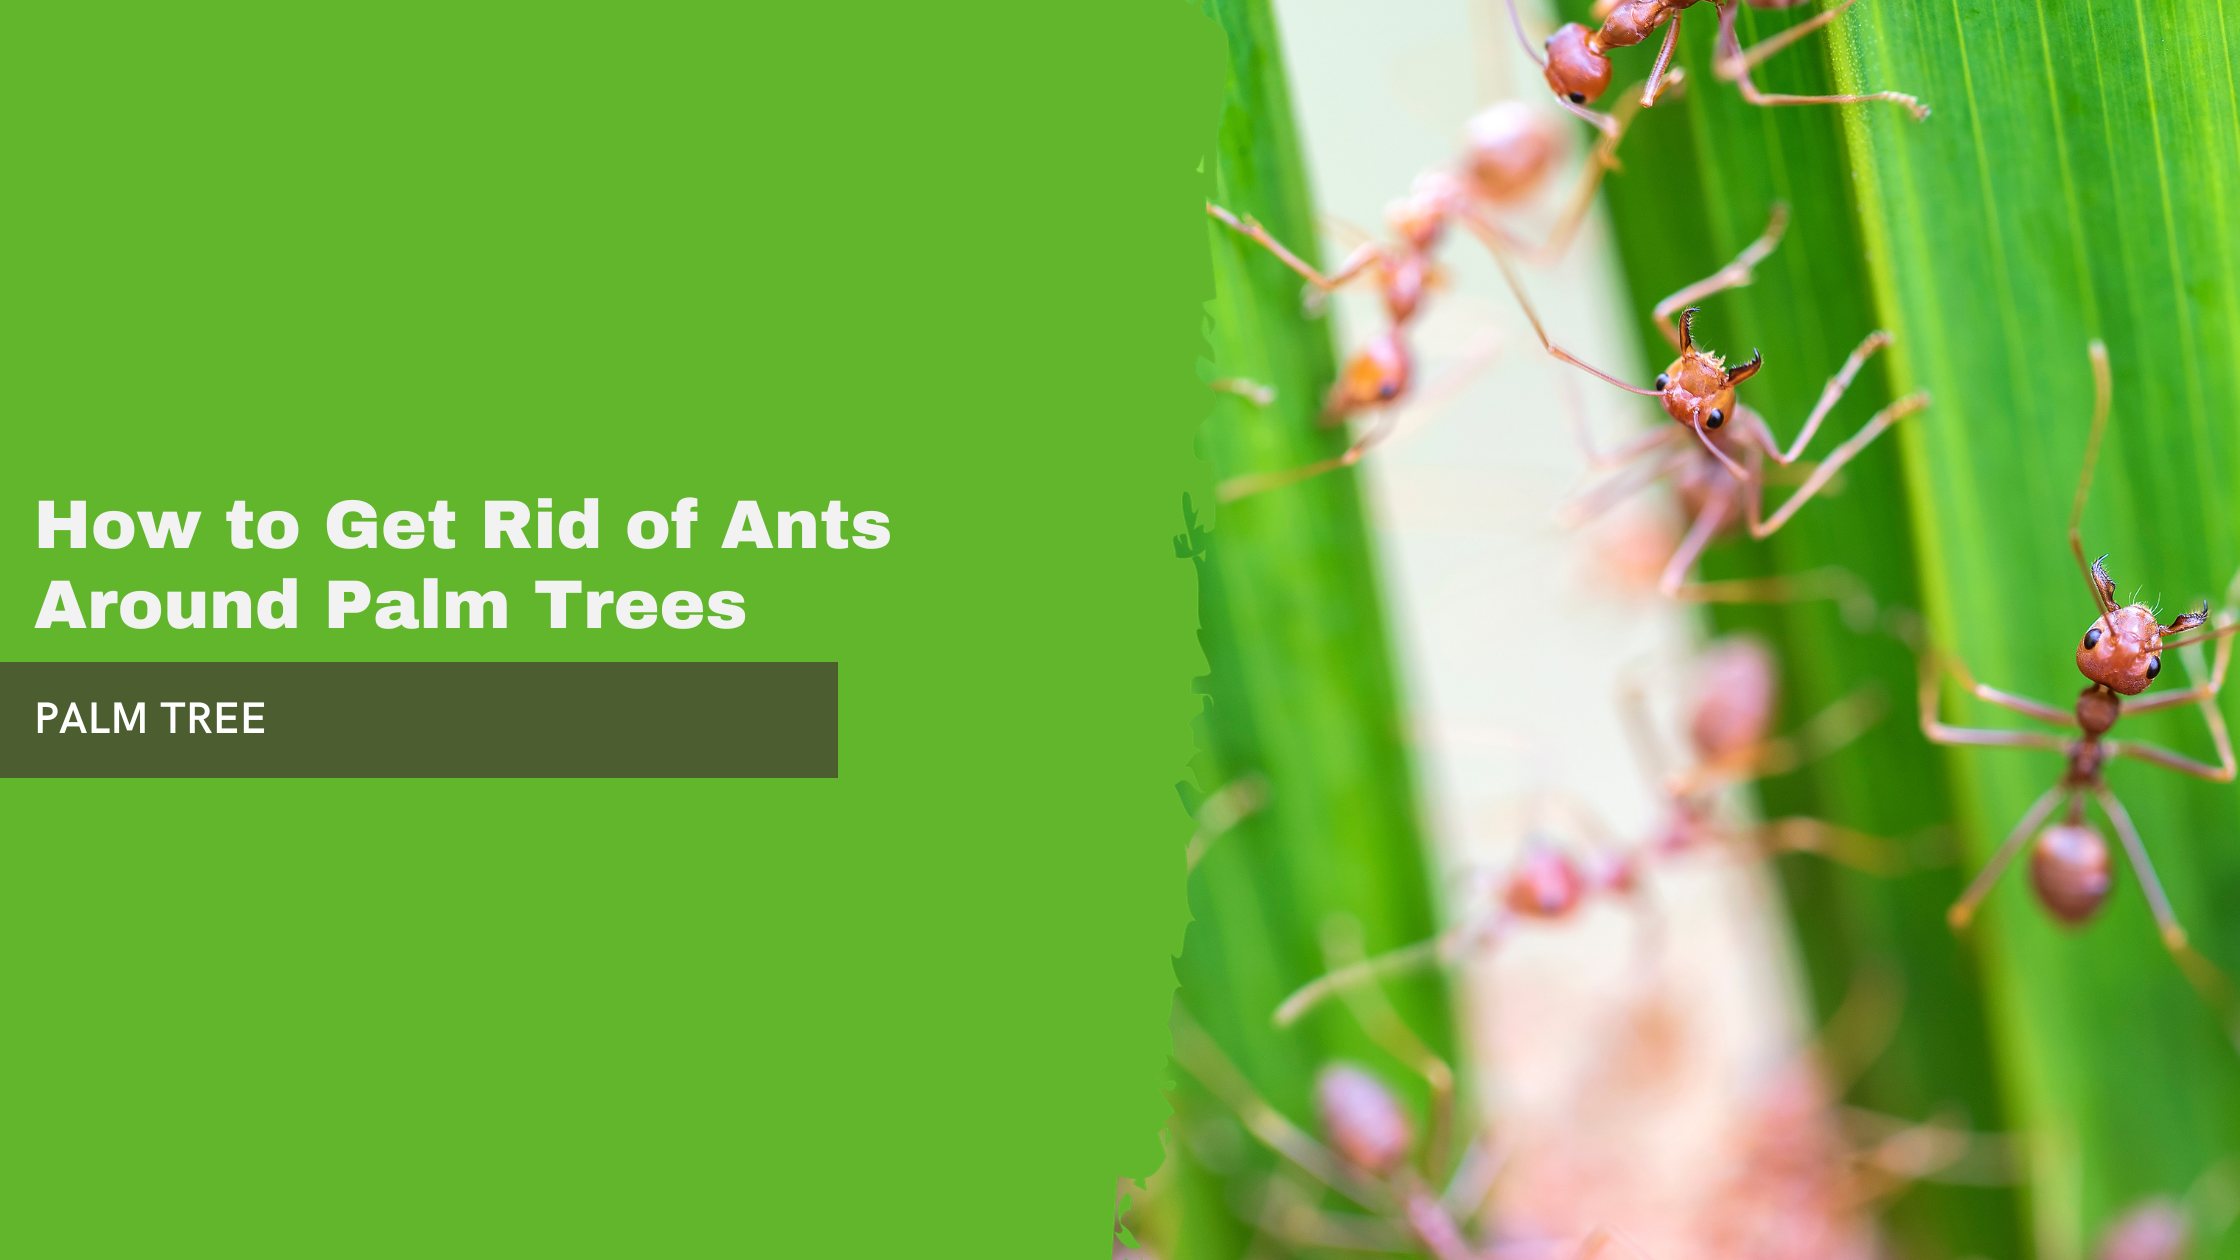 How to Get Rid of Ants Around Palm Trees